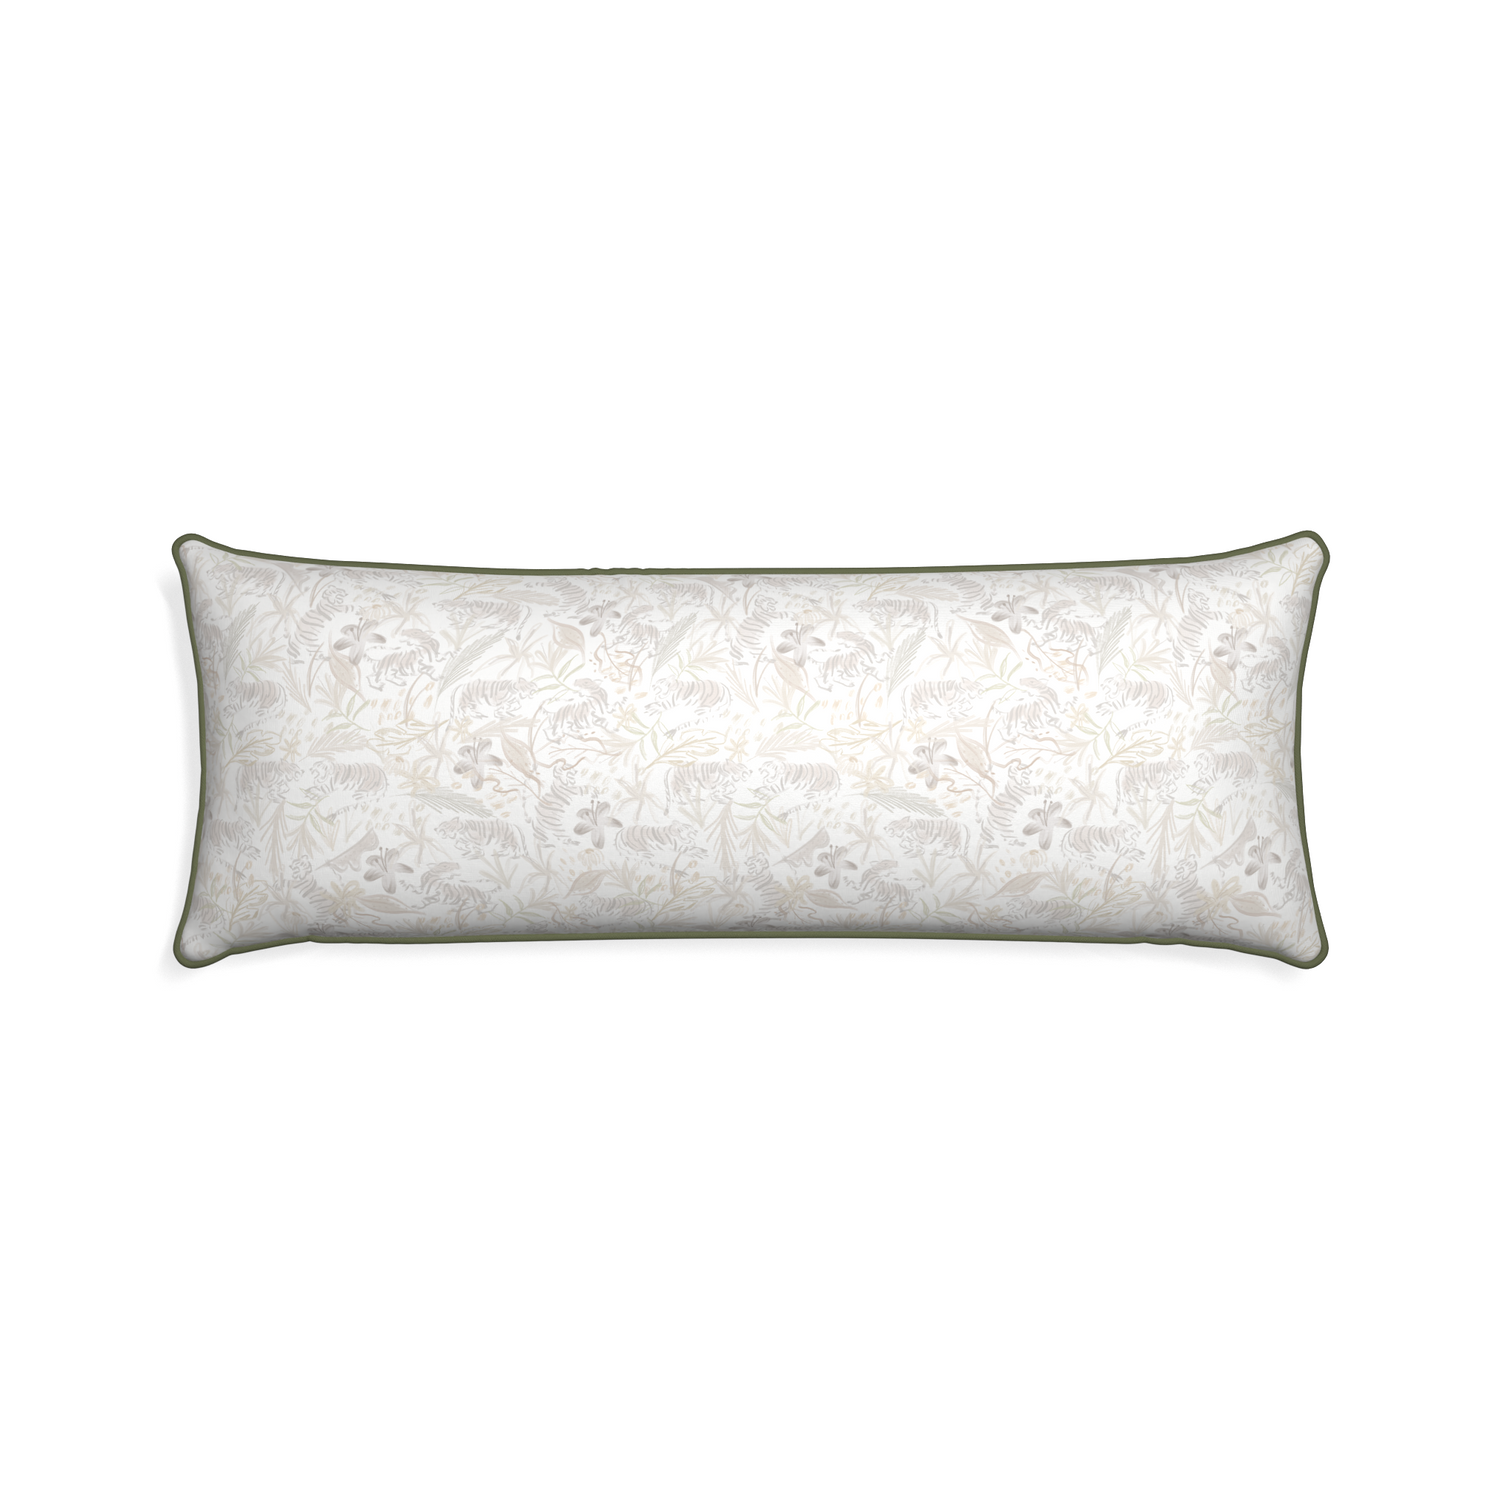 Xl-lumbar frida sand custom beige chinoiserie tigerpillow with f piping on white background